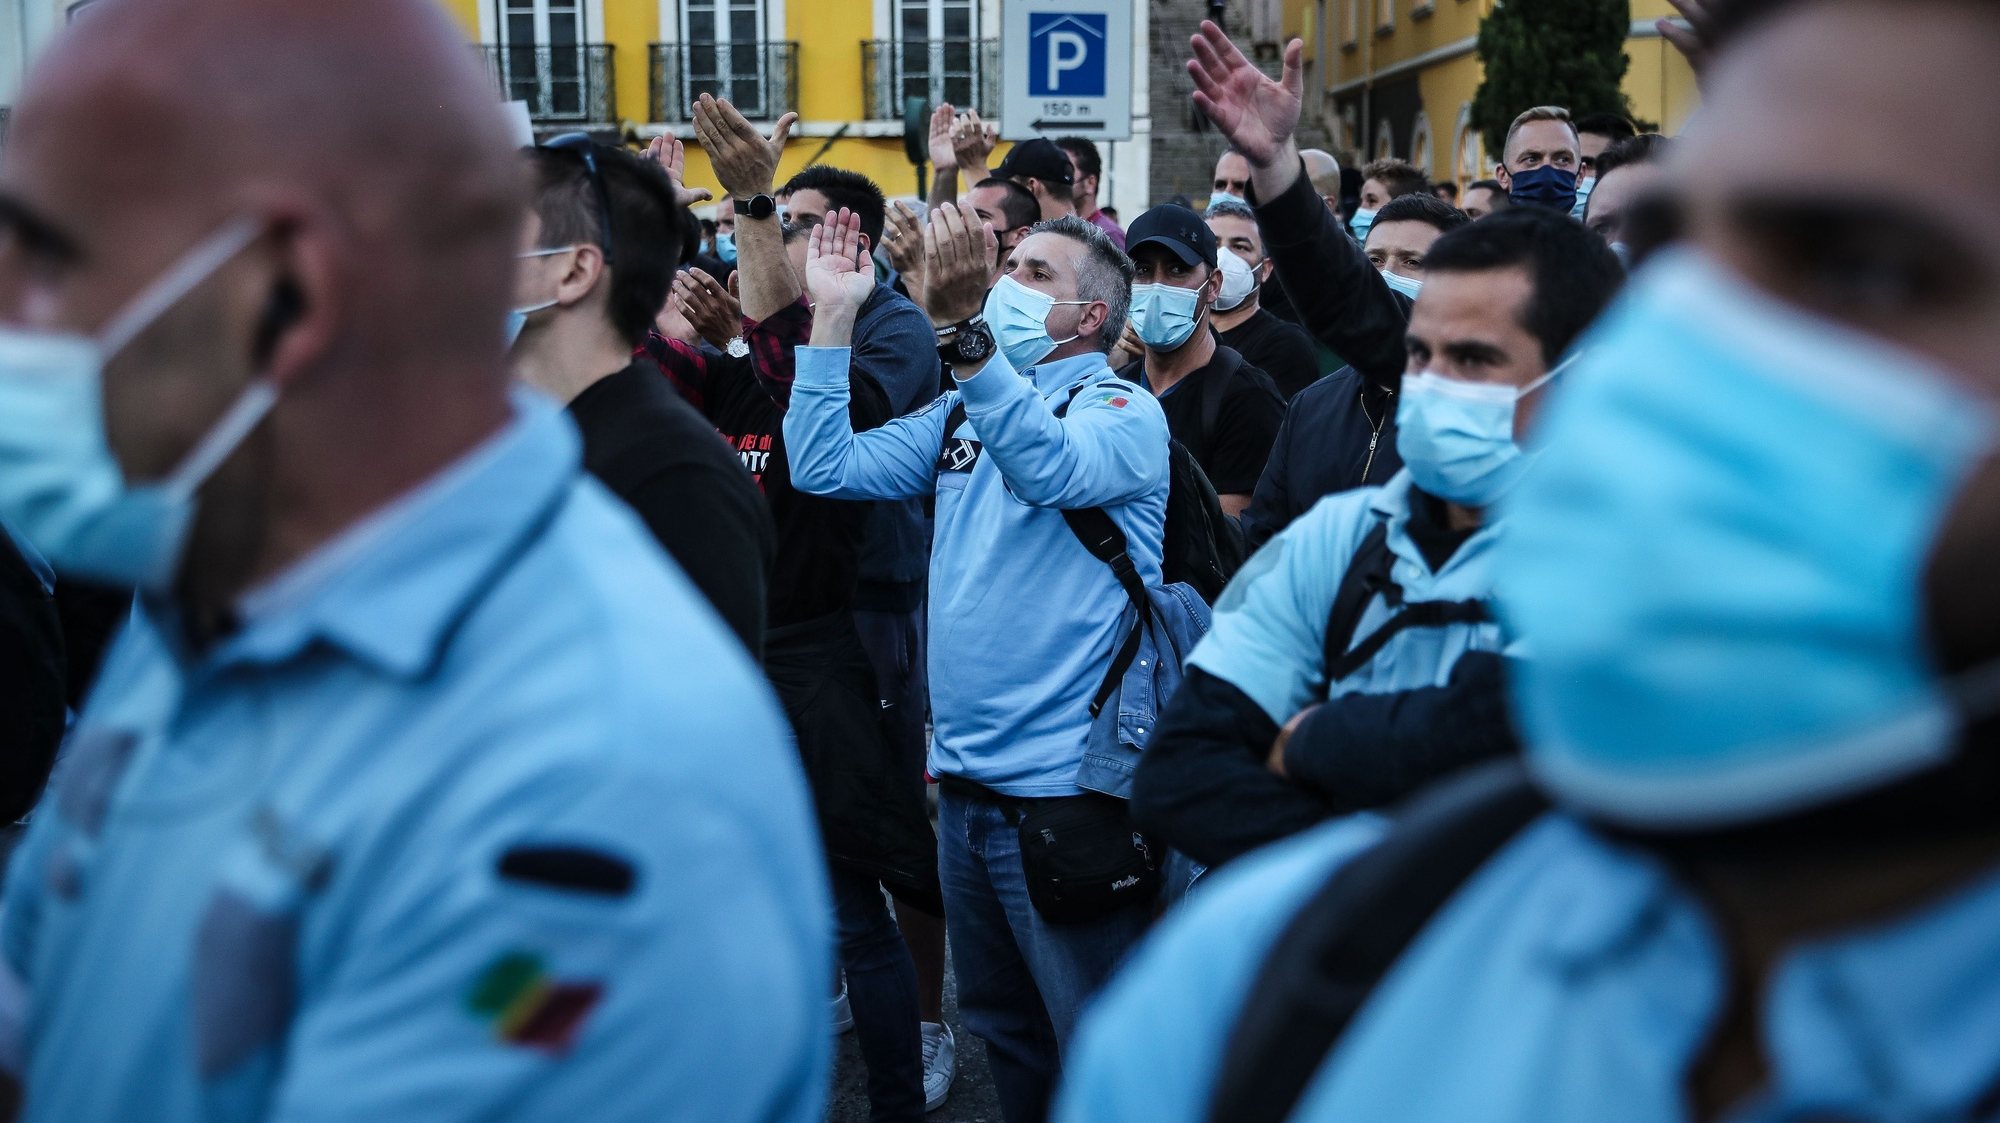 Police officers take part in a protest organized by &#039;Movimento Zero&#039; under the slogan &#039;Time to Act - United We Are the Storm that Torments Them!&#039; to demand better pay and working conditions, in front of the Parliament in Lisbon, Portugal, 21 June 2021. &#039;Movimento Zero&#039; is an anonymous, non-hierarchical movement formed on social media.  MARIO CRUZ / LUSA